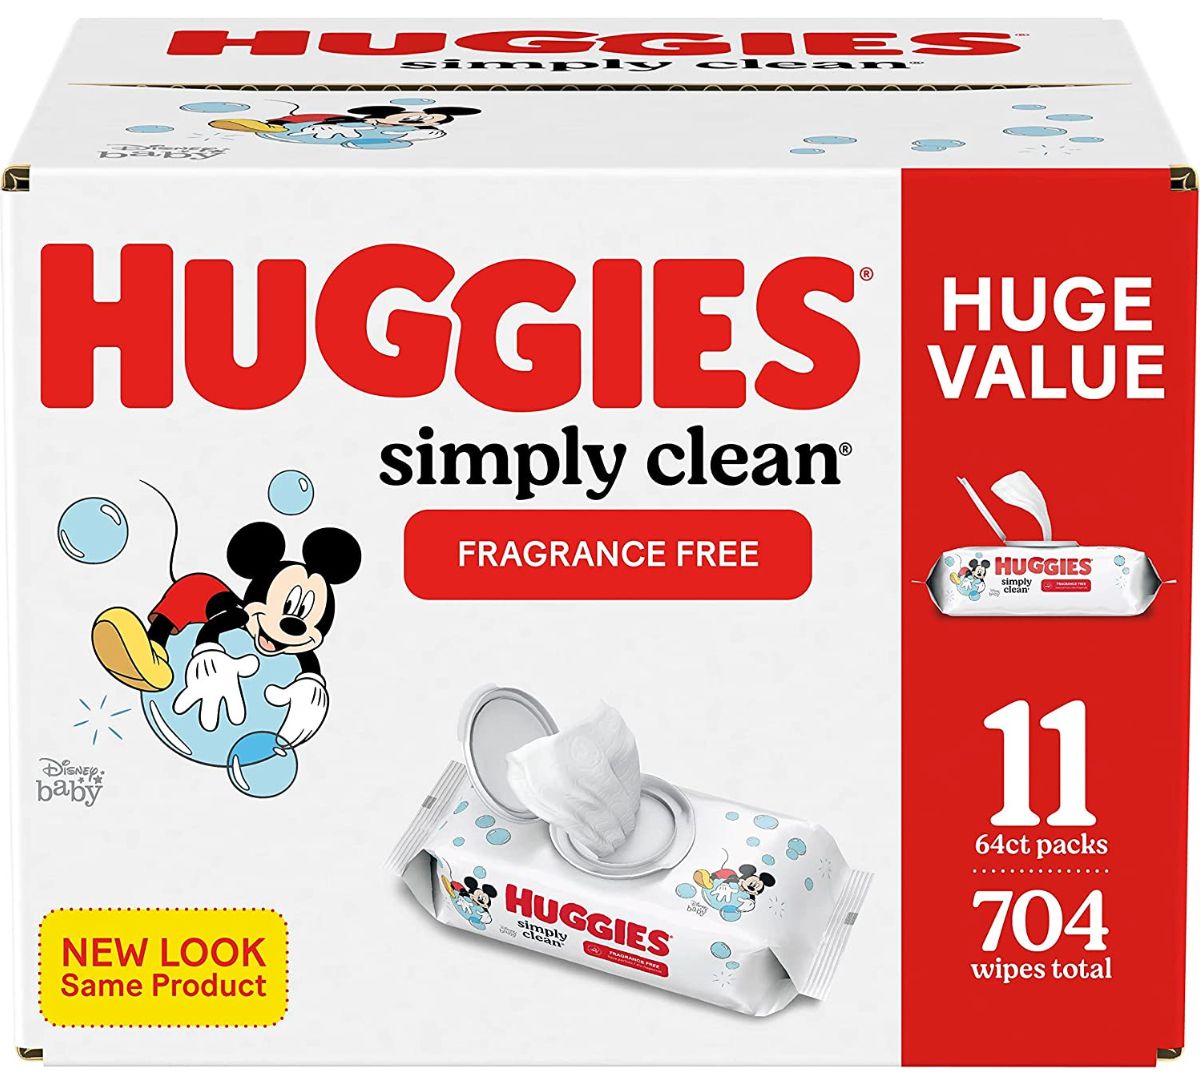 A box of Huggies simply clean baby wipes 704 count